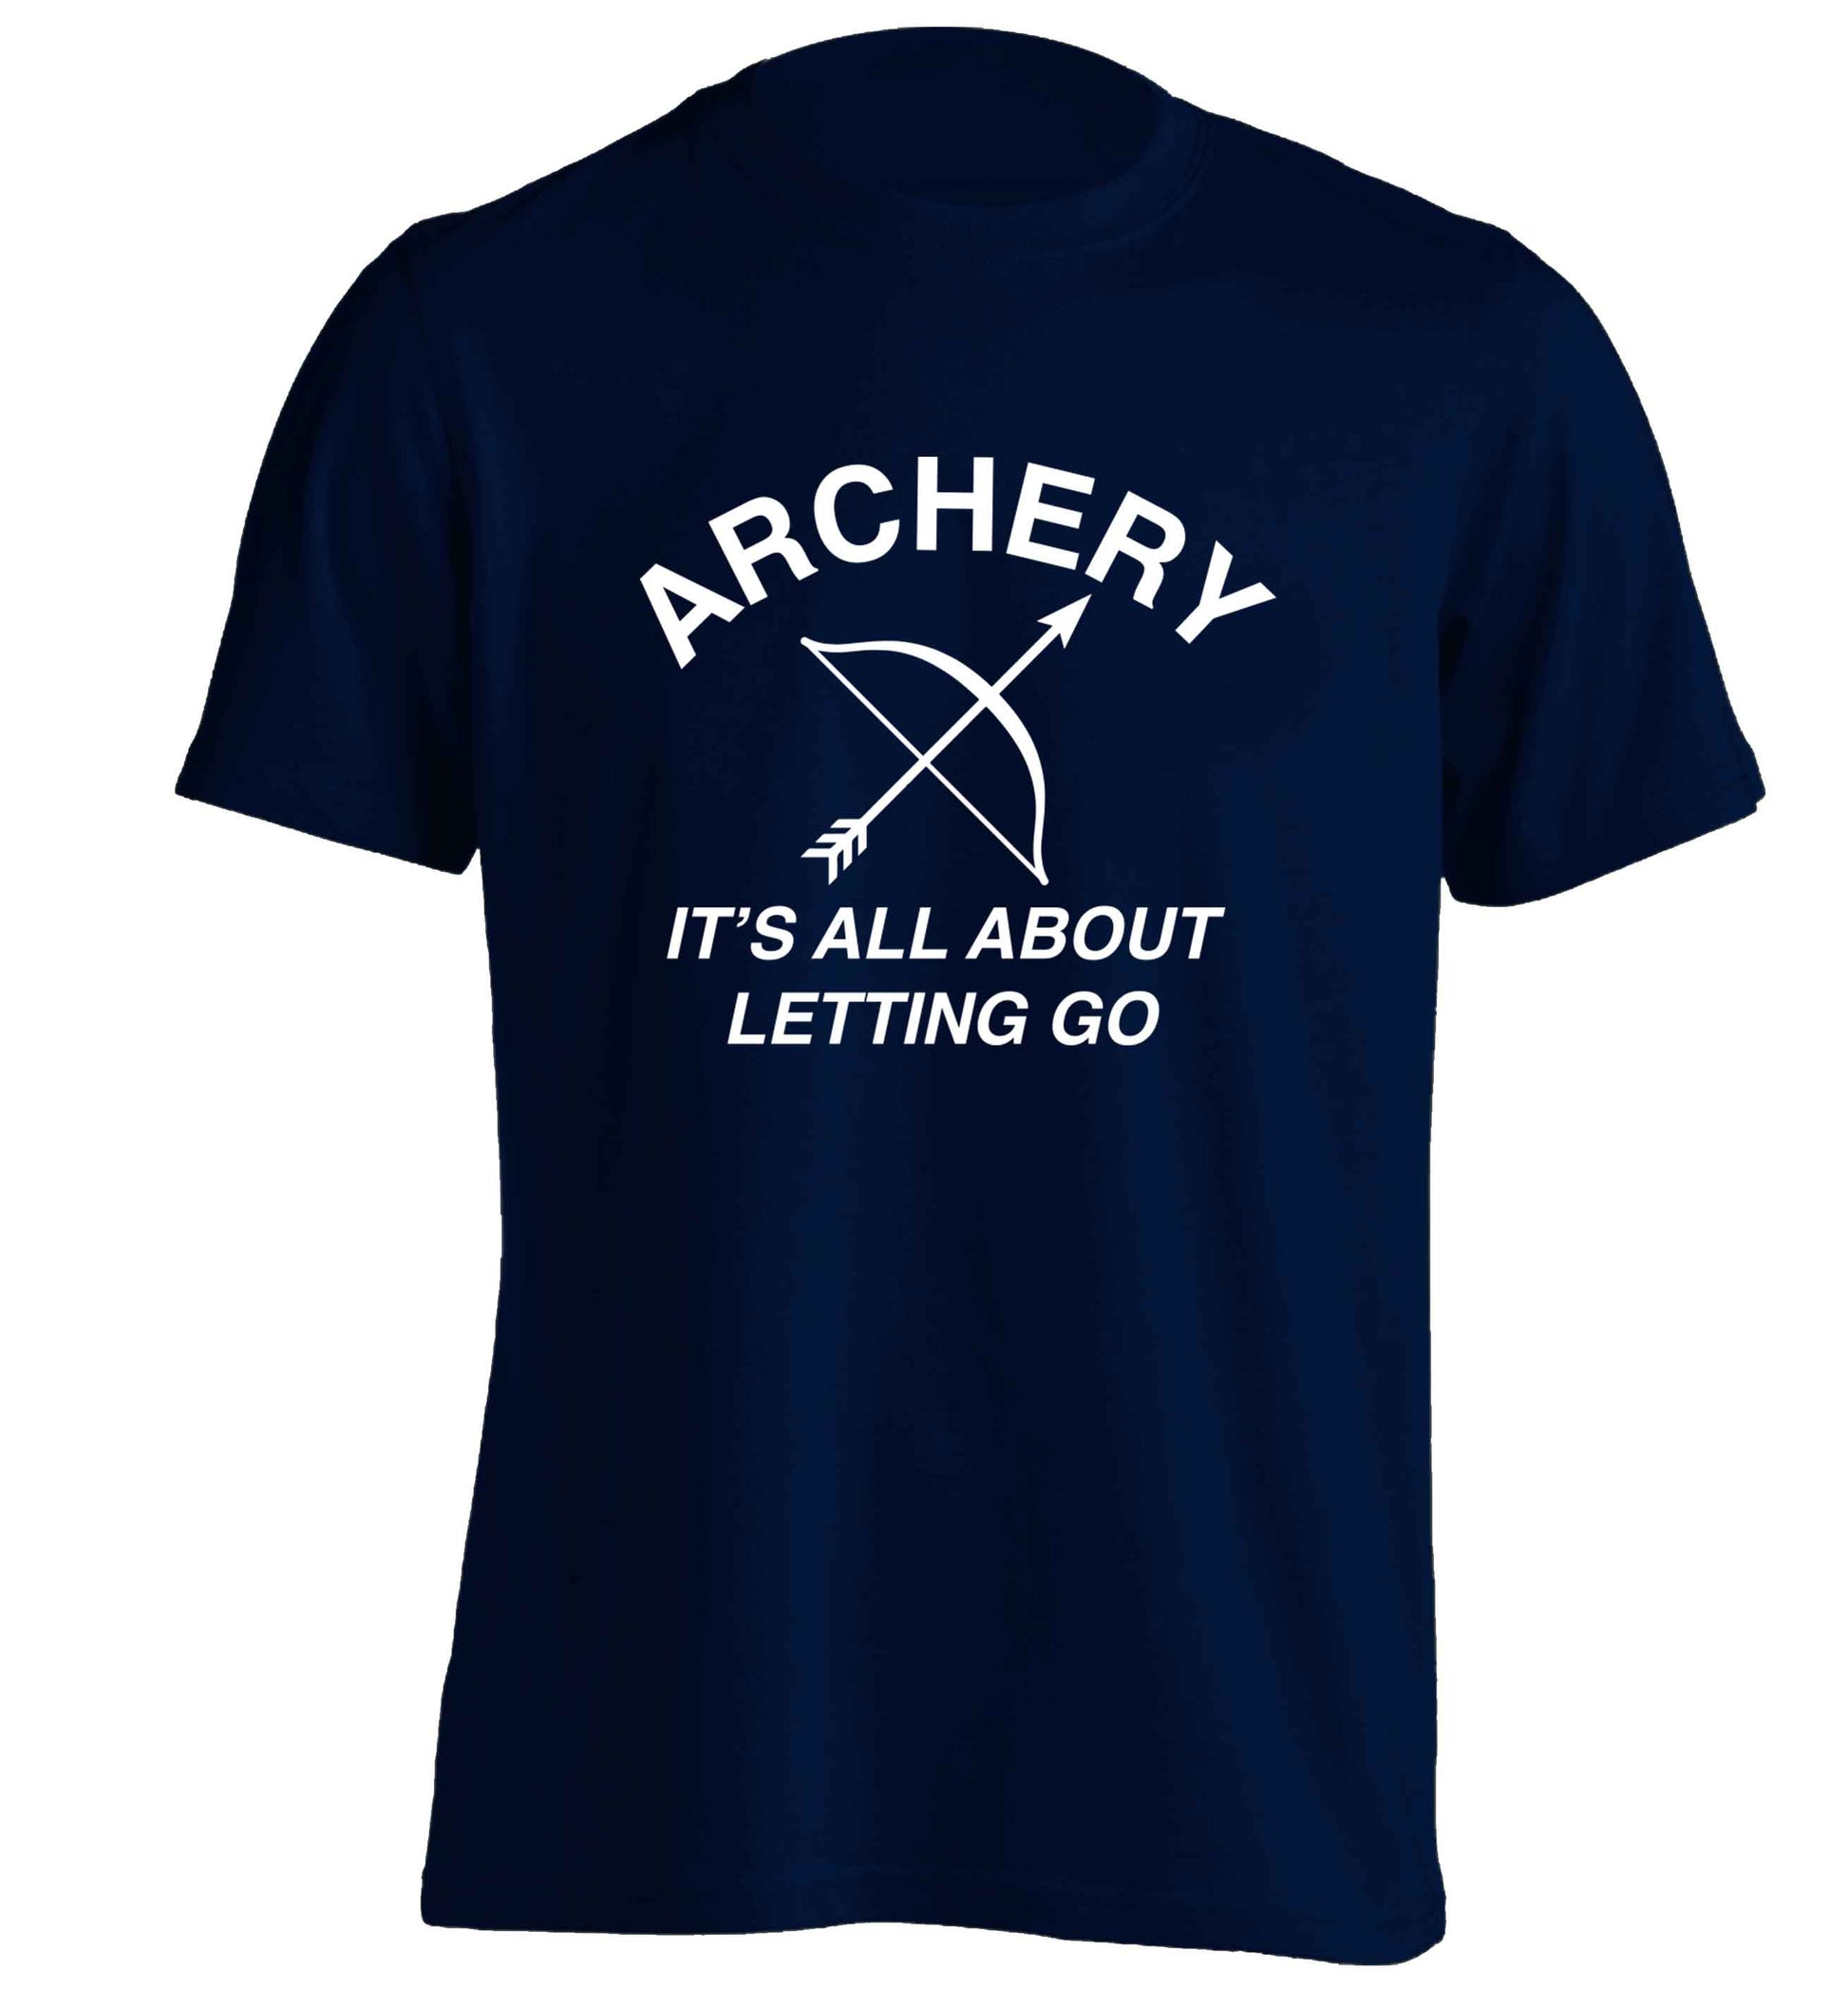 Archery it's all about letting go adults unisex navy Tshirt 2XL